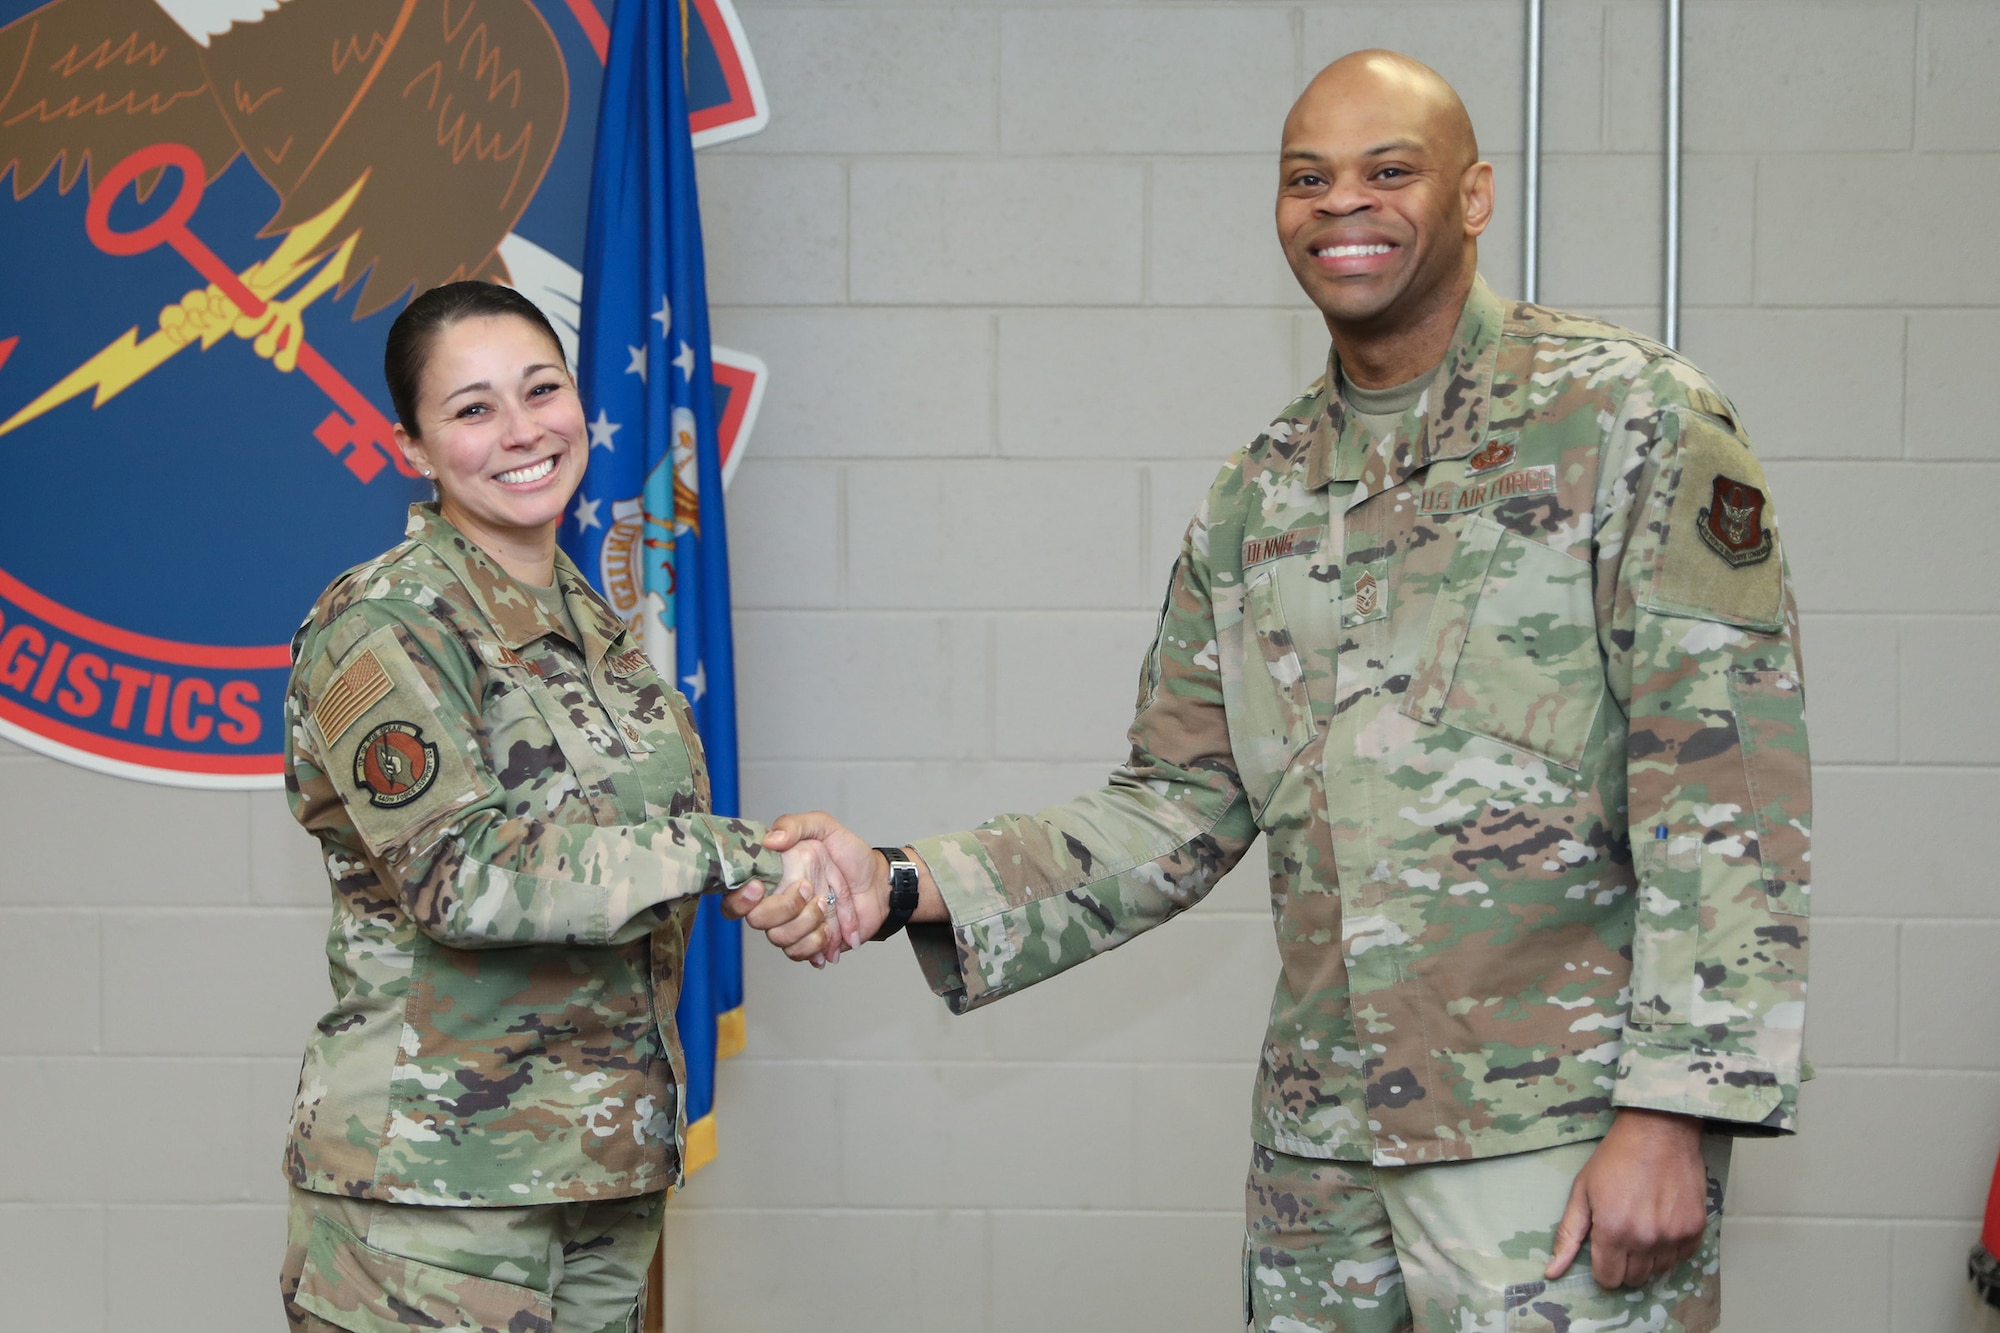 Chief Master Sgt. Travon W. Dennis, Fourth Air Force Command Chief, coins Master Sgt. Felicia Johnson, 445th Force Support Squadron NCO in charge of installation personnel readiness, for being her squadron's outstanding performer during his visit at Wright-Patterson Air Force Base, Ohio, Jan. 7, 2024. During his 2-day visit to the wing, Chief Dennis also coined the following outstanding performers; Master Sgt. Christopher Wise, 445th Operations Support Squadron; Tech. Sgt. Elizabeth Snavely, 445th Aerospace Medicine Squadron; Senior Airman Valerie Phan, 445th Aeromedical Staging Squadron; and Senior Airman Stephanie Gillispie, 445th Maintenance Squadron. (U.S. Air Force photo/Senior Airman Angela Jackson)